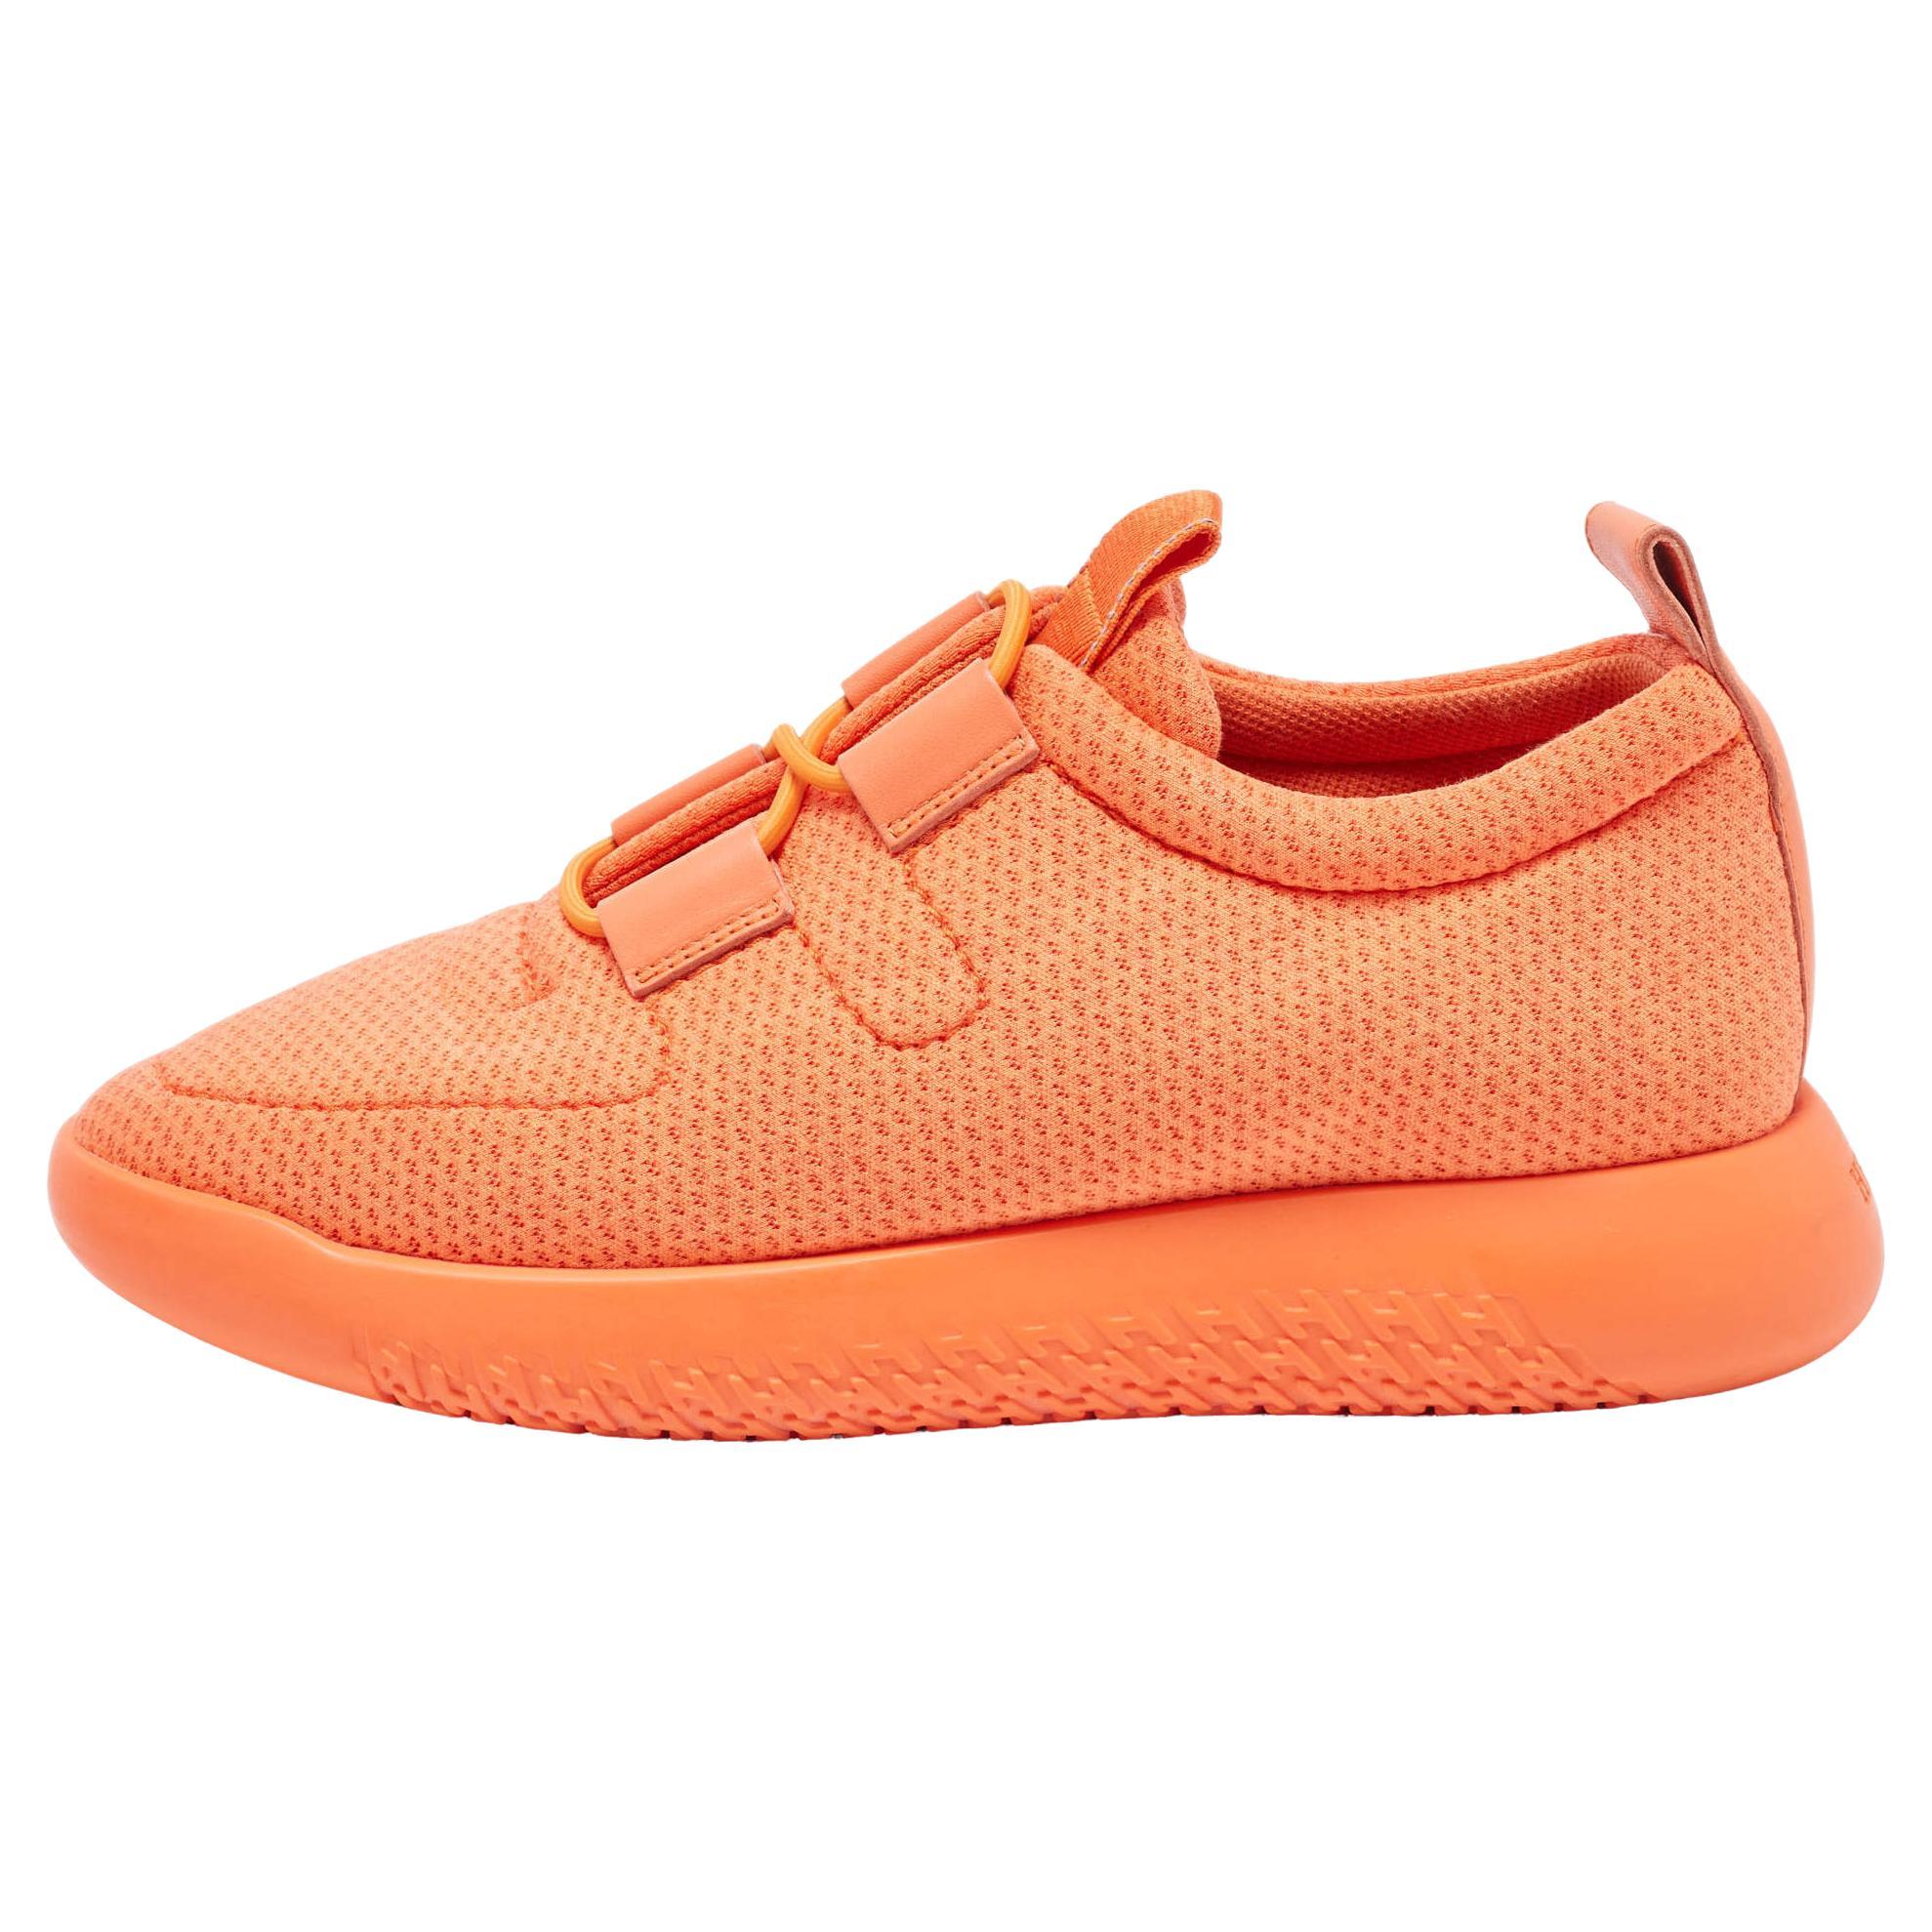 Hermès Orange Leather and Neoprene Low Top Sneakers Size 36